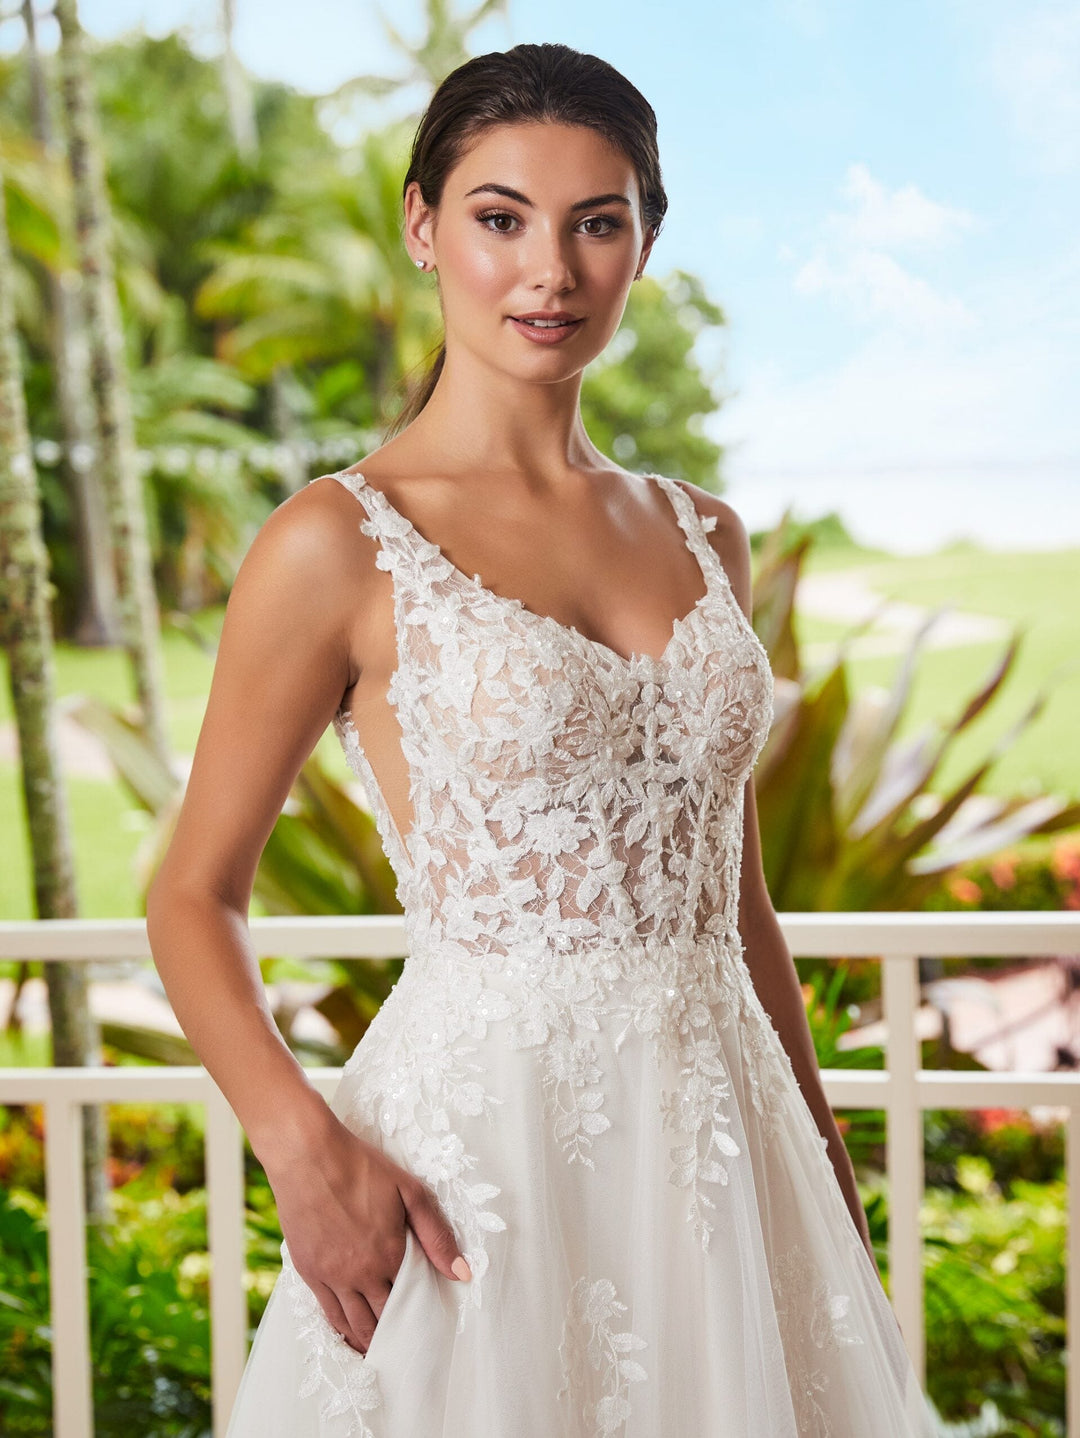 Sheer Applique Slit Bridal Gown by Adrianna Papell 31219